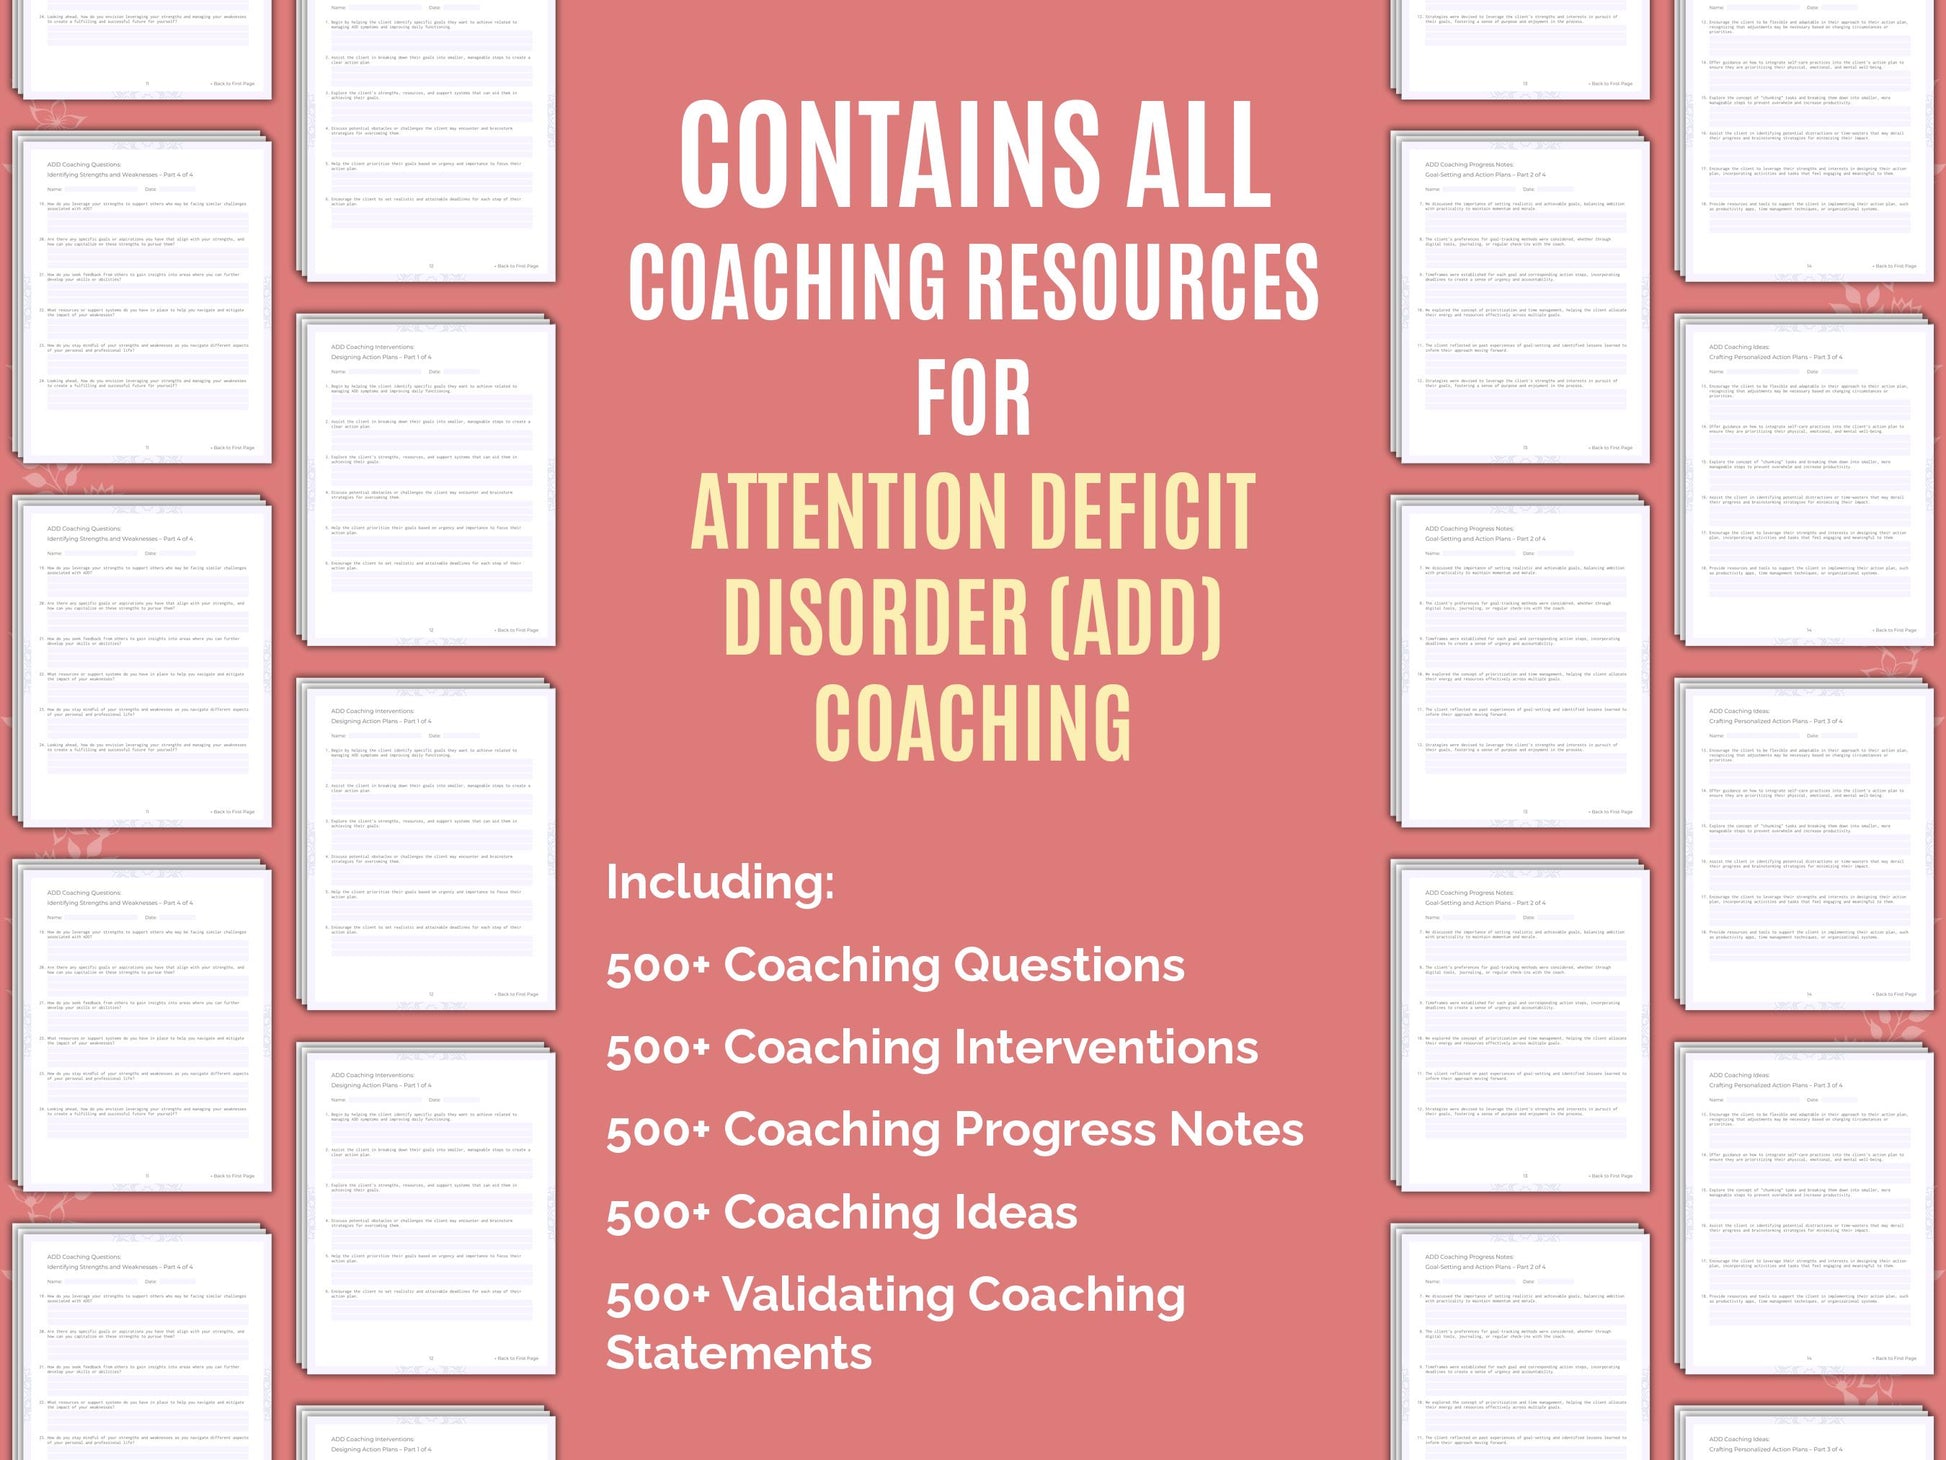 Coaching Interventions Resource